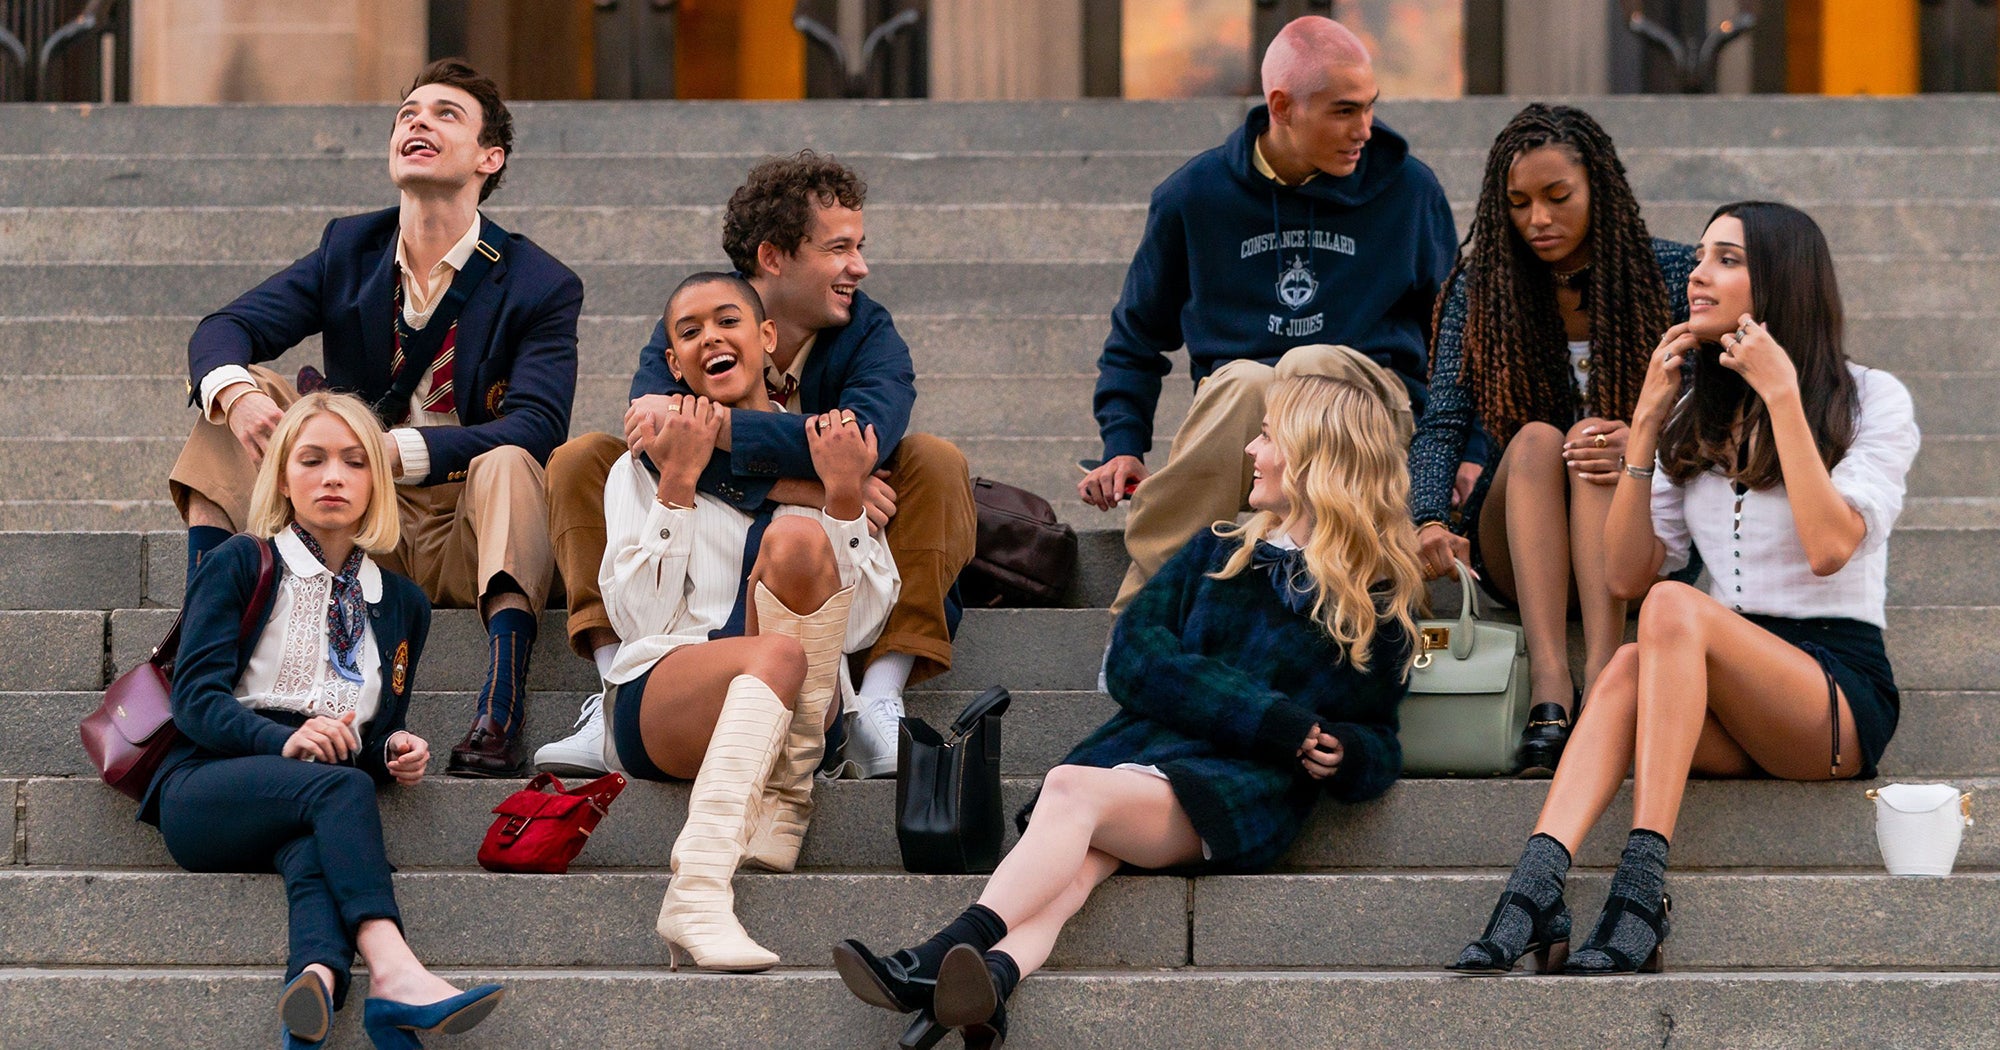 Will the Gossip Girl Outfits Reveal What's in and out in 2021?